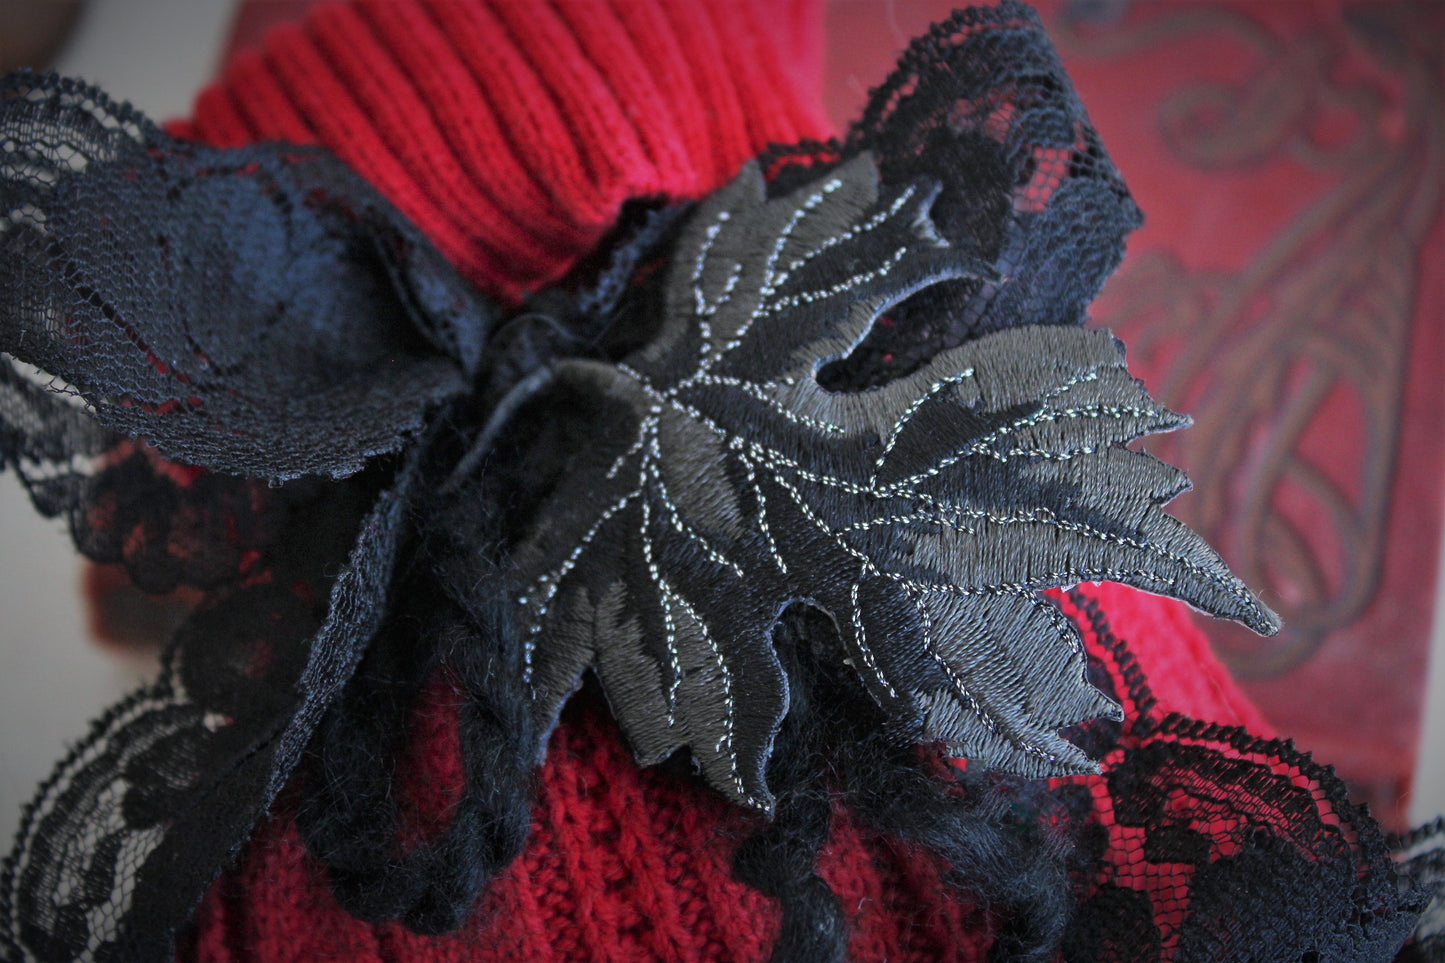 "Winter Witch" Scented Sachet In Red and Black